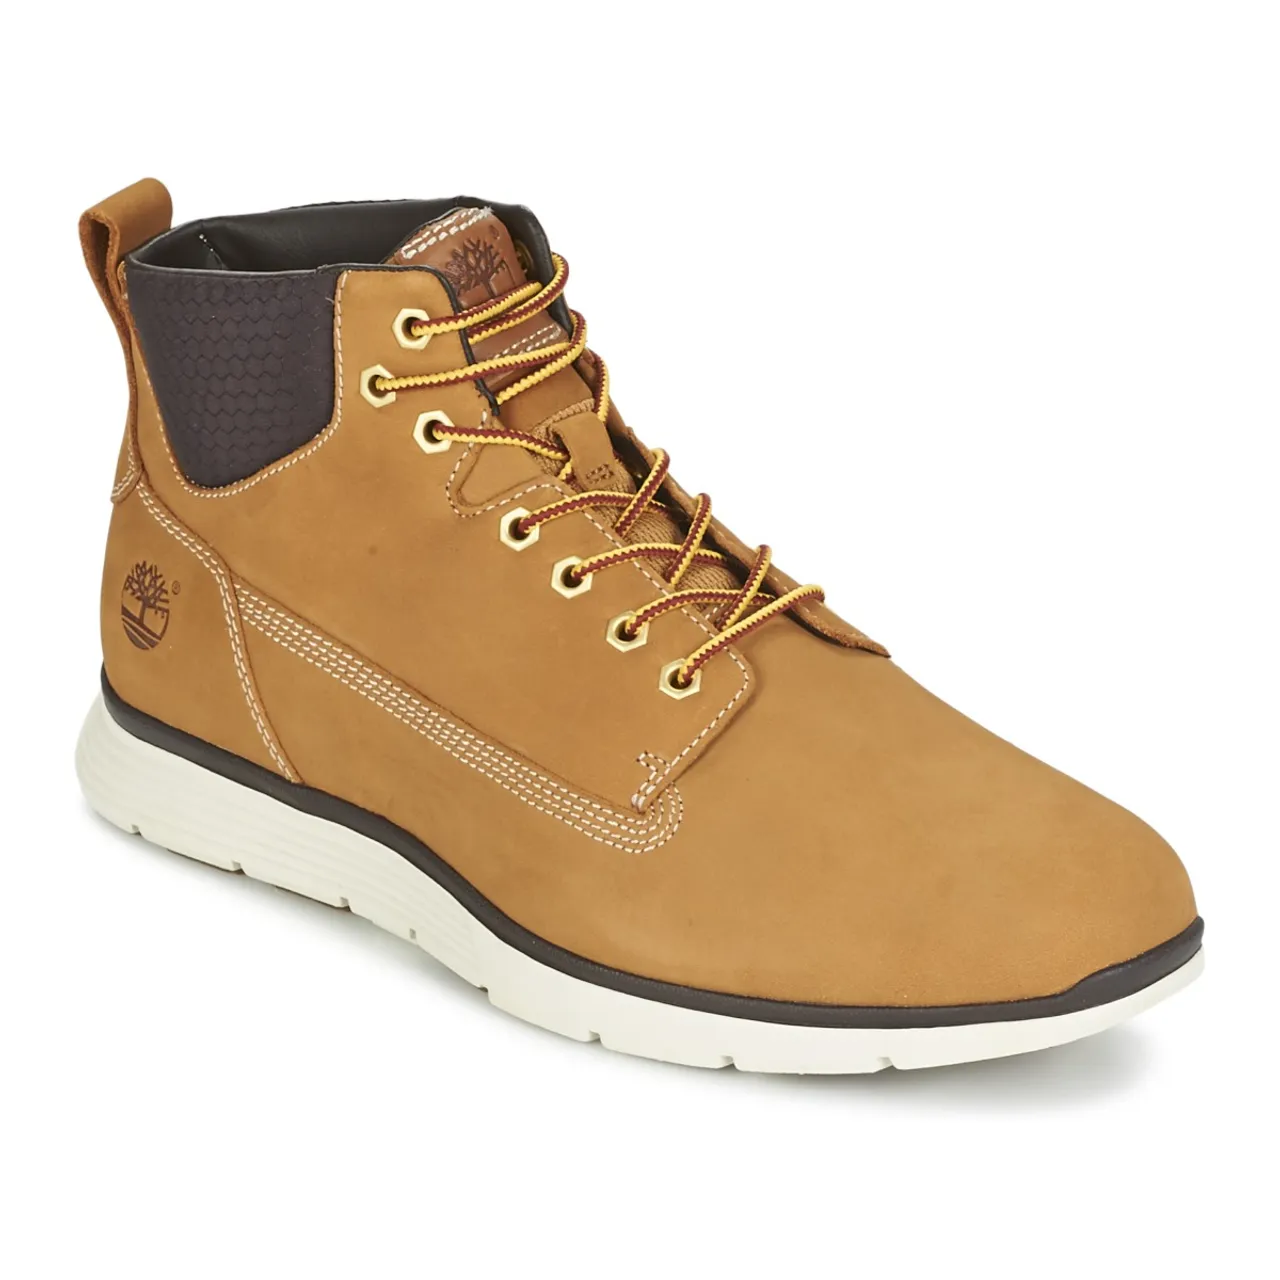 Timberland  KILLINGTON CHUKKA WHEAT  men's Shoes (High-top Trainers) in Beige